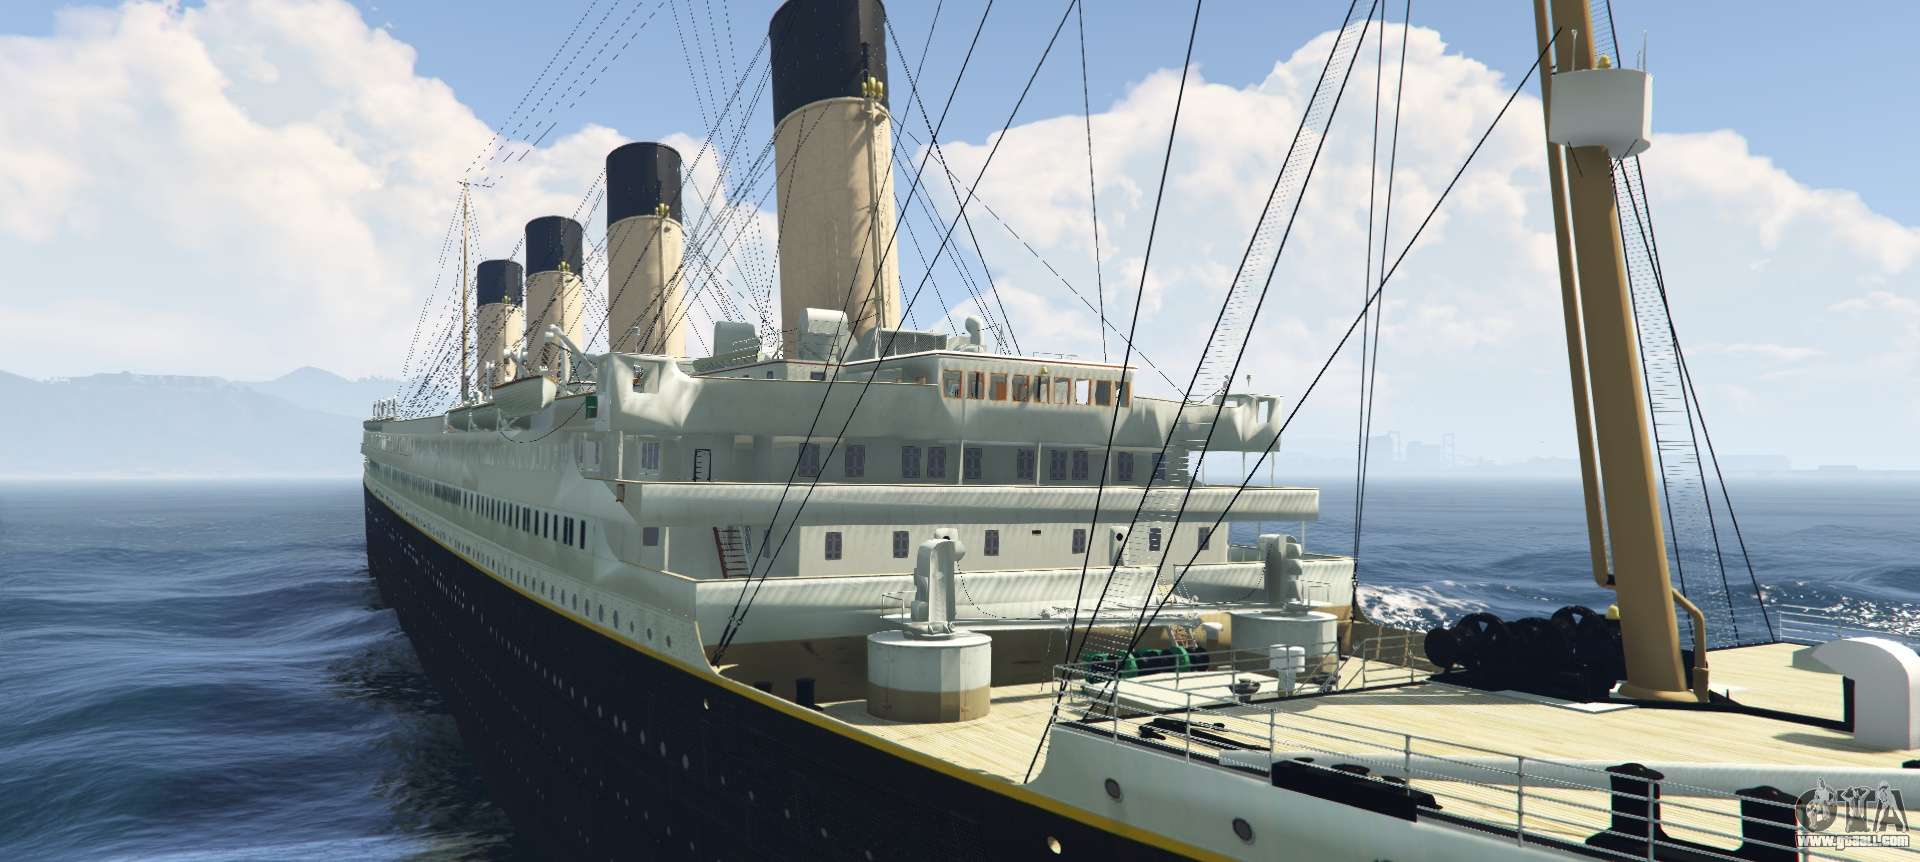 gta episodes from liberty city titanic